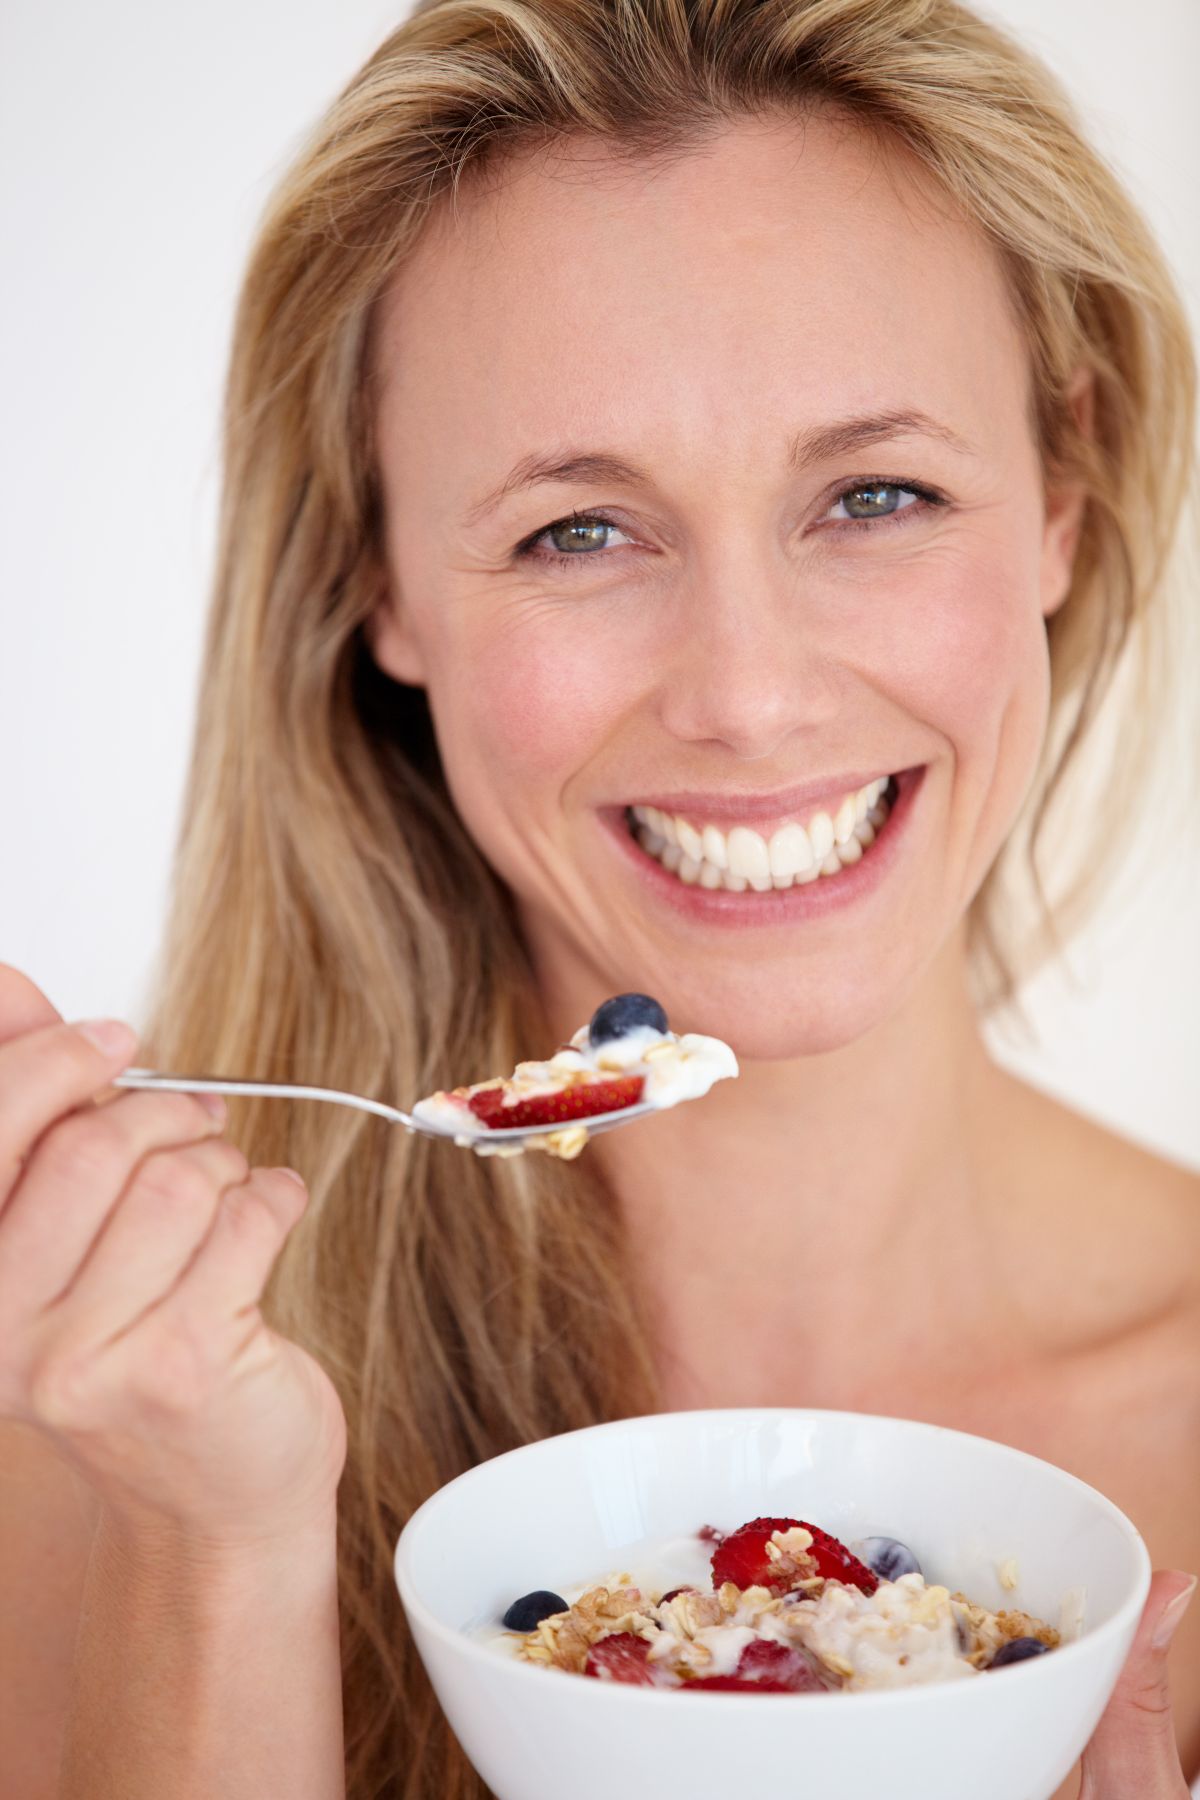 Woman with white teath eating healthy